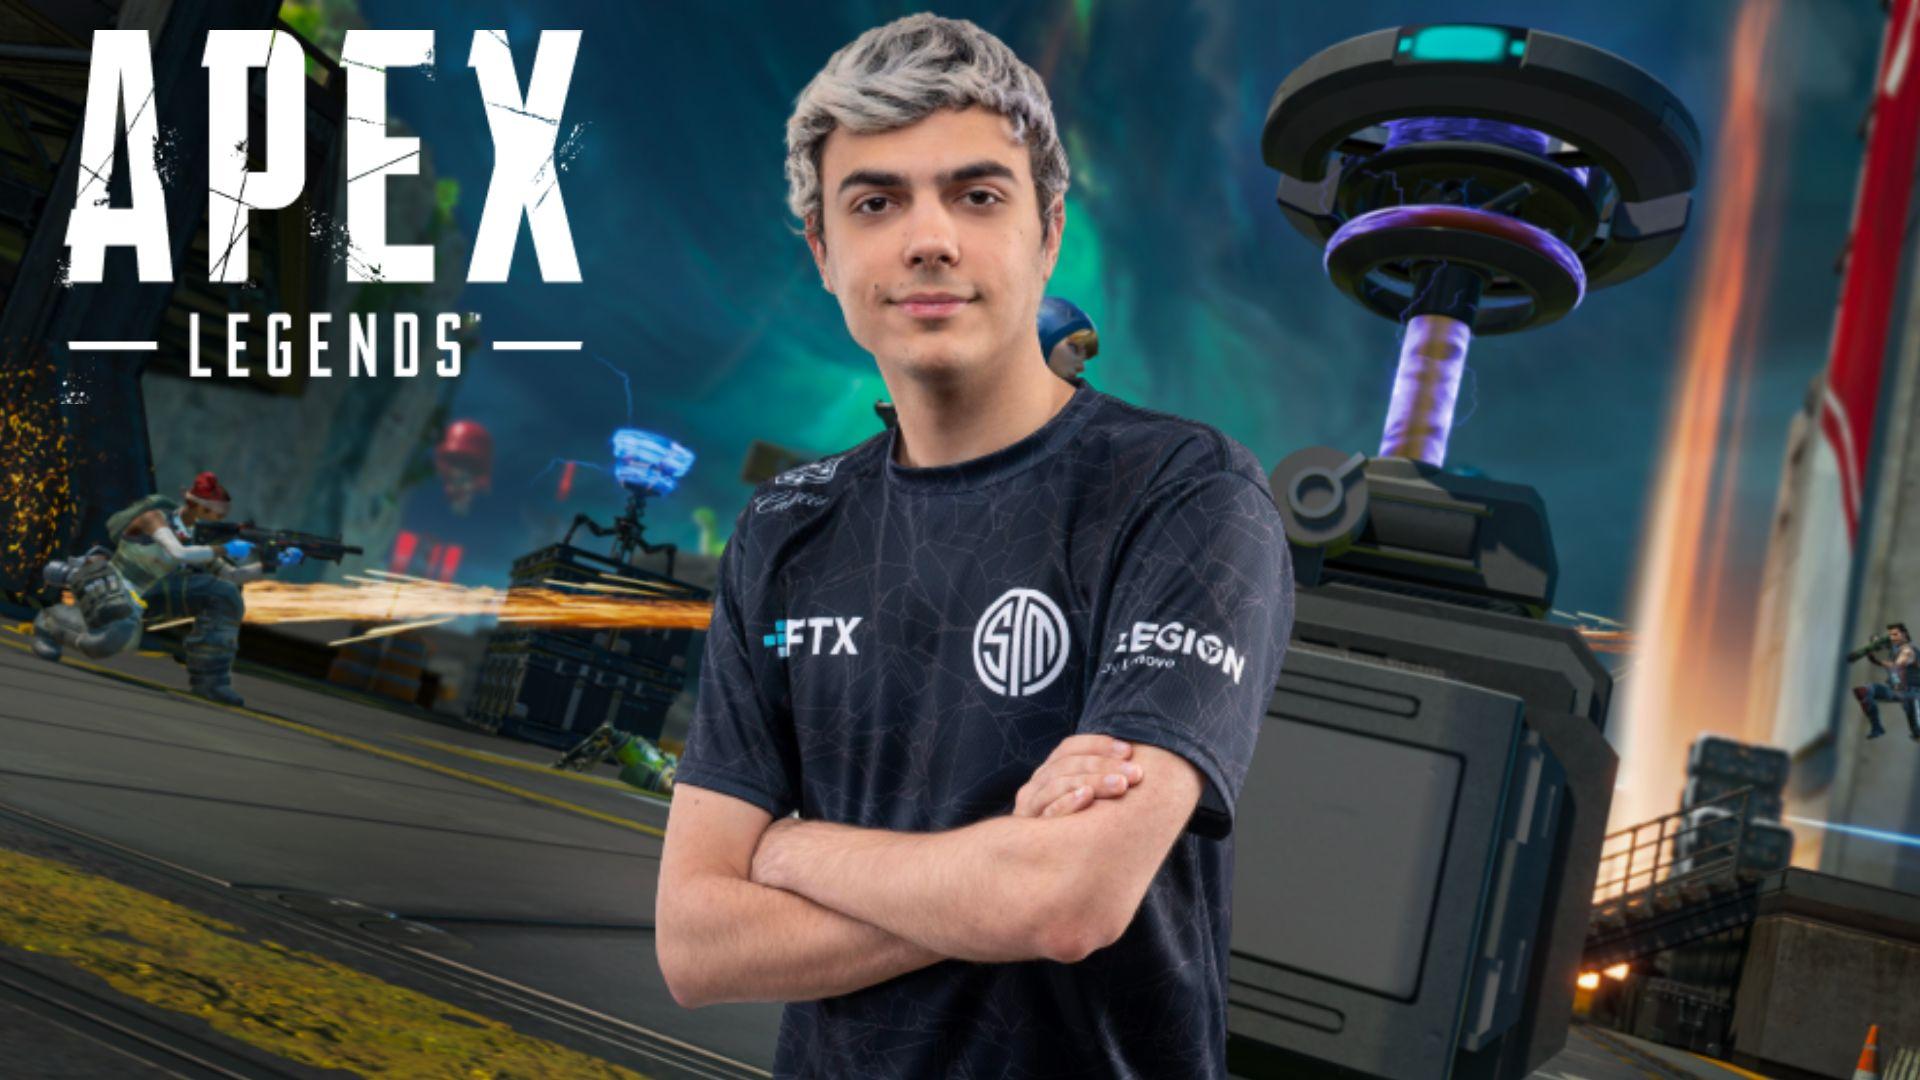 ImperialHal stood in front of Apex Legends characters fighting in Season 16